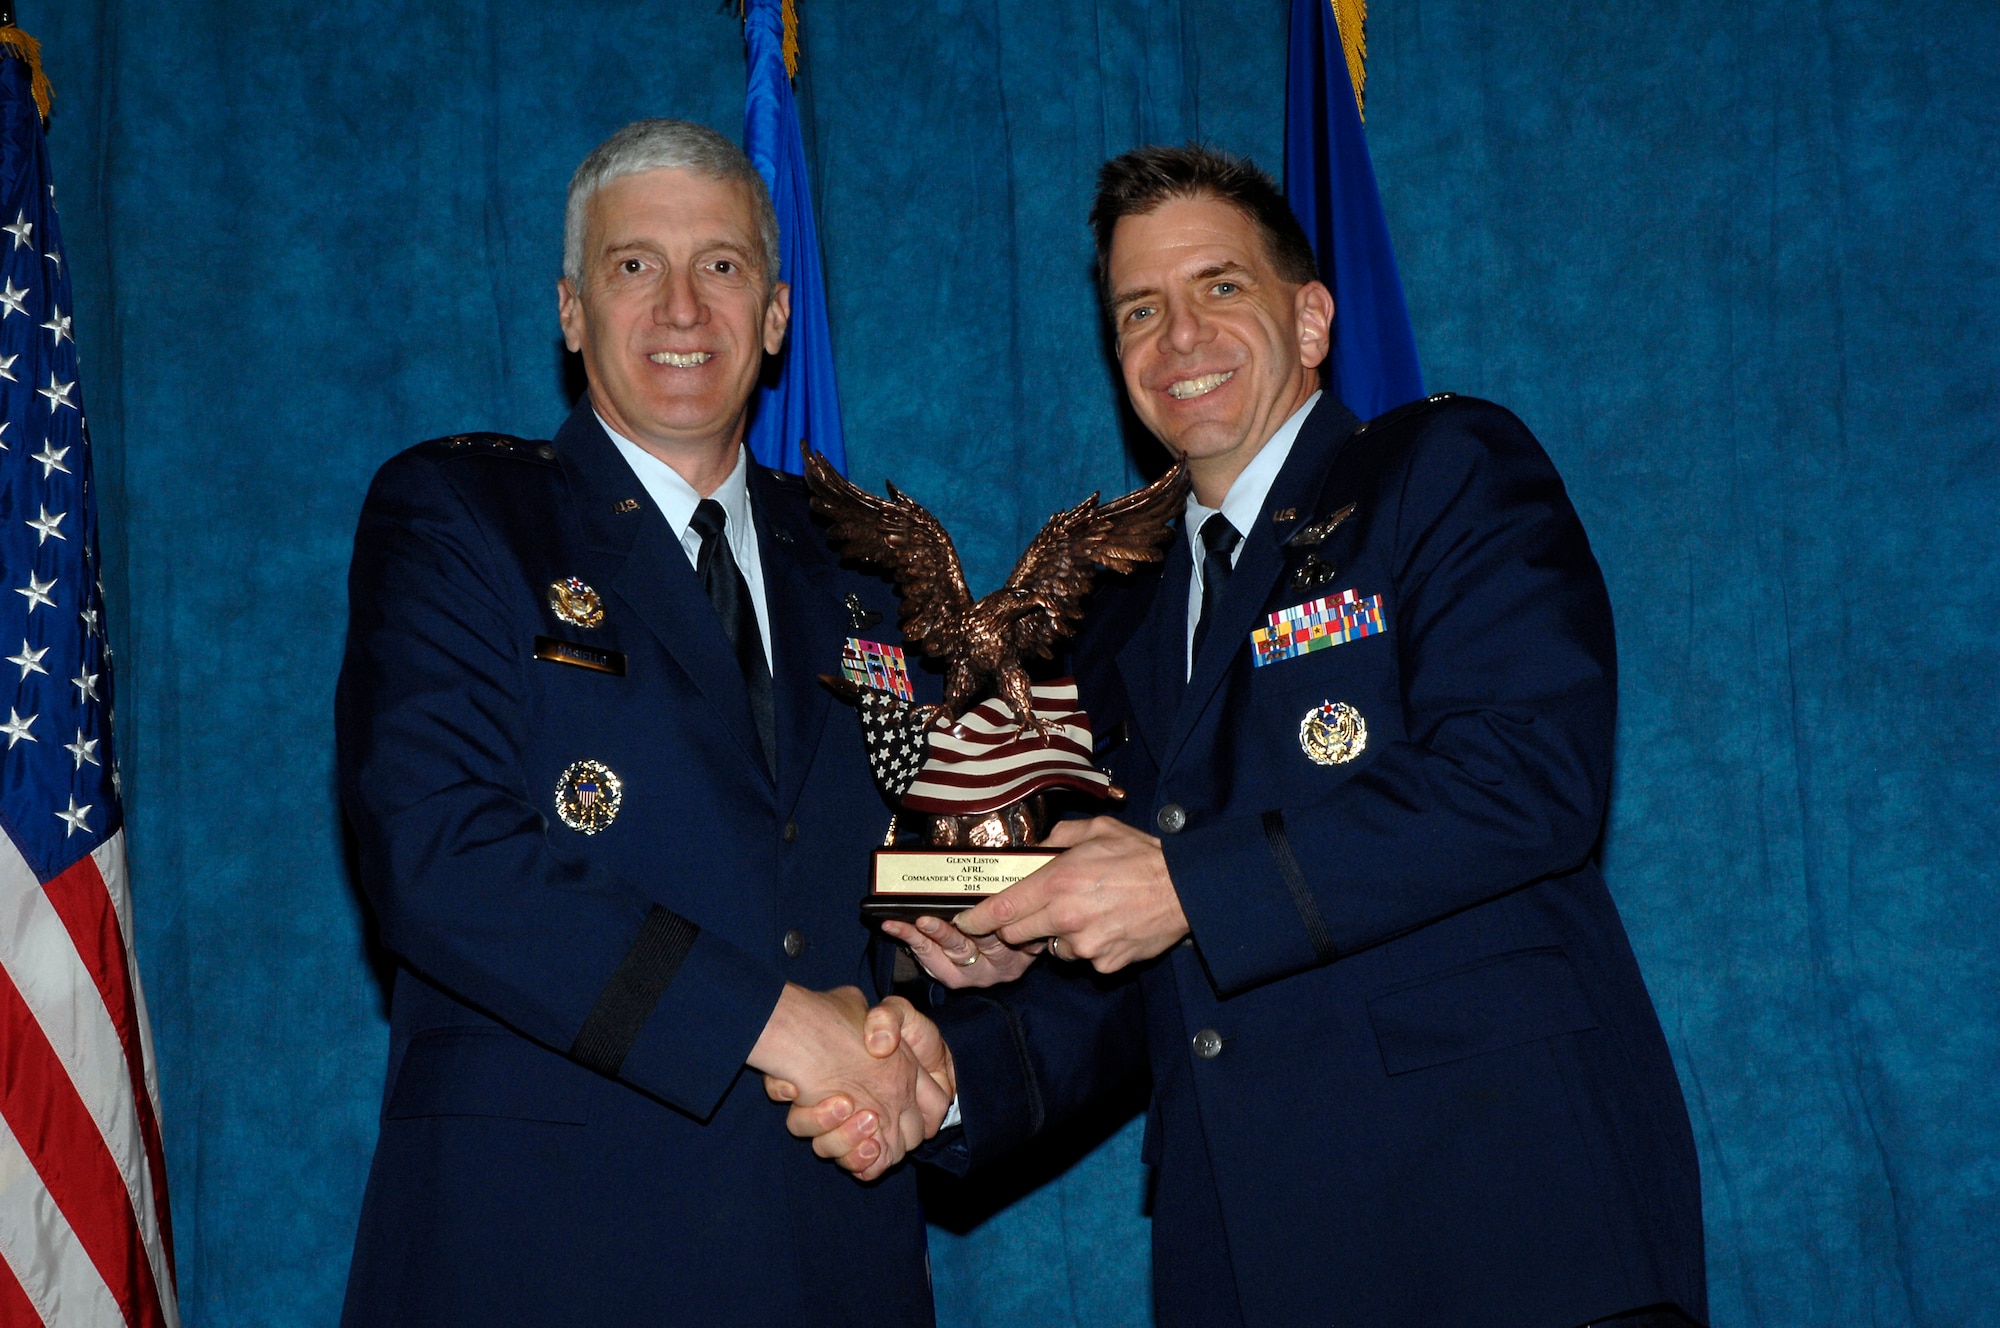 Maj. Gen. Tom Masiello, AFRL commander, presents Glenn Liston with a Commander’s Cup (Senior Individual) award during the 2015 AFRL Annual Awards ceremony. (U.S. Air Force photo by Albert Bright)